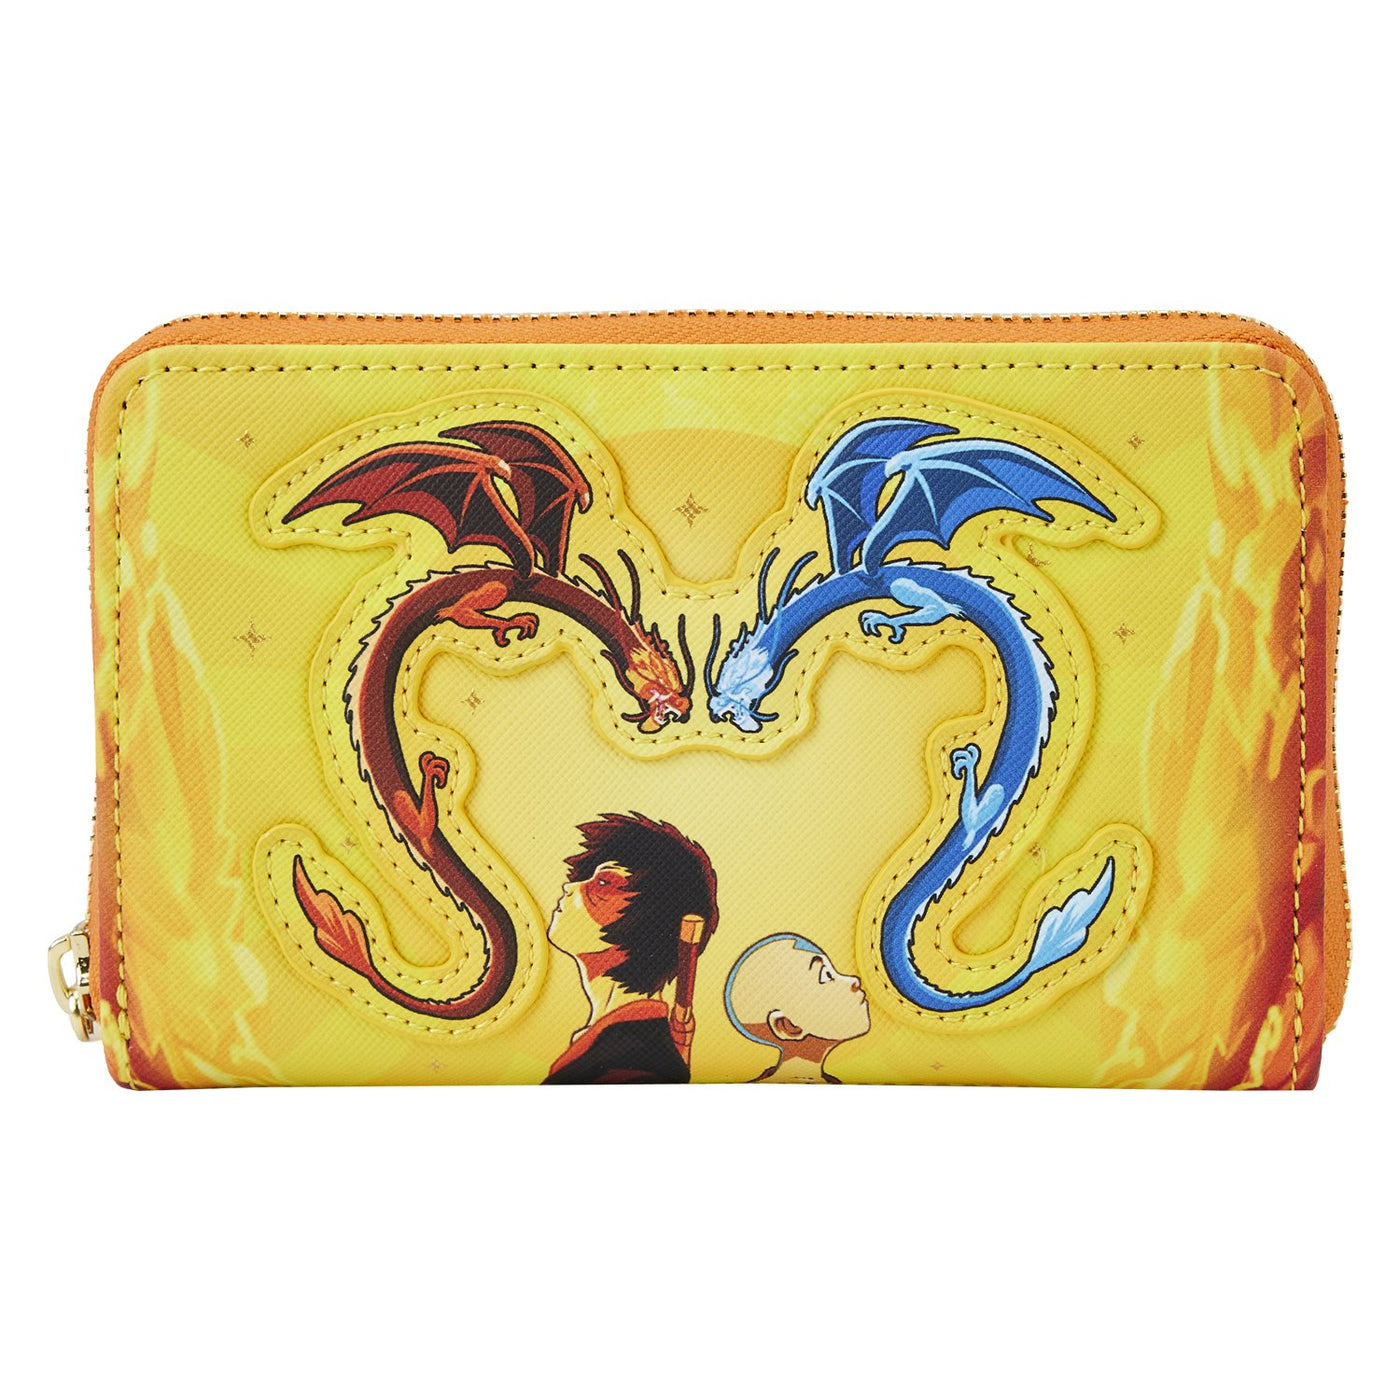 671803395206 - Loungefly Nickelodeon Avatar The Last Airbender The Fire Dance Zip-Around Wallet - Front